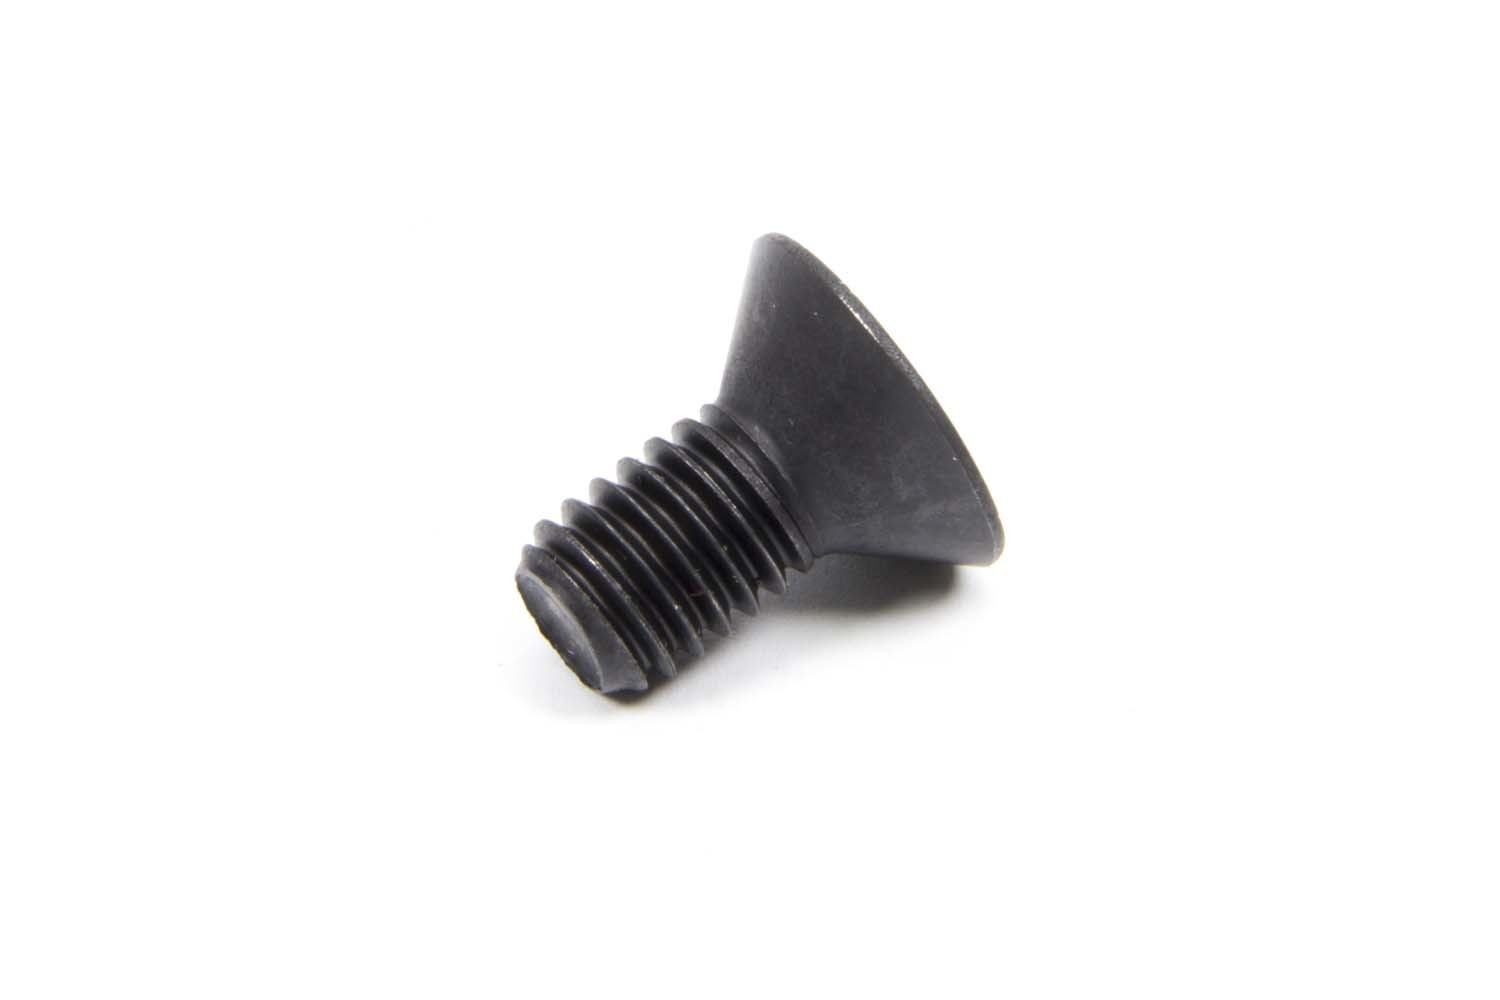 Screw For Drive Flange 3/8-16 Tapered Head - 20551